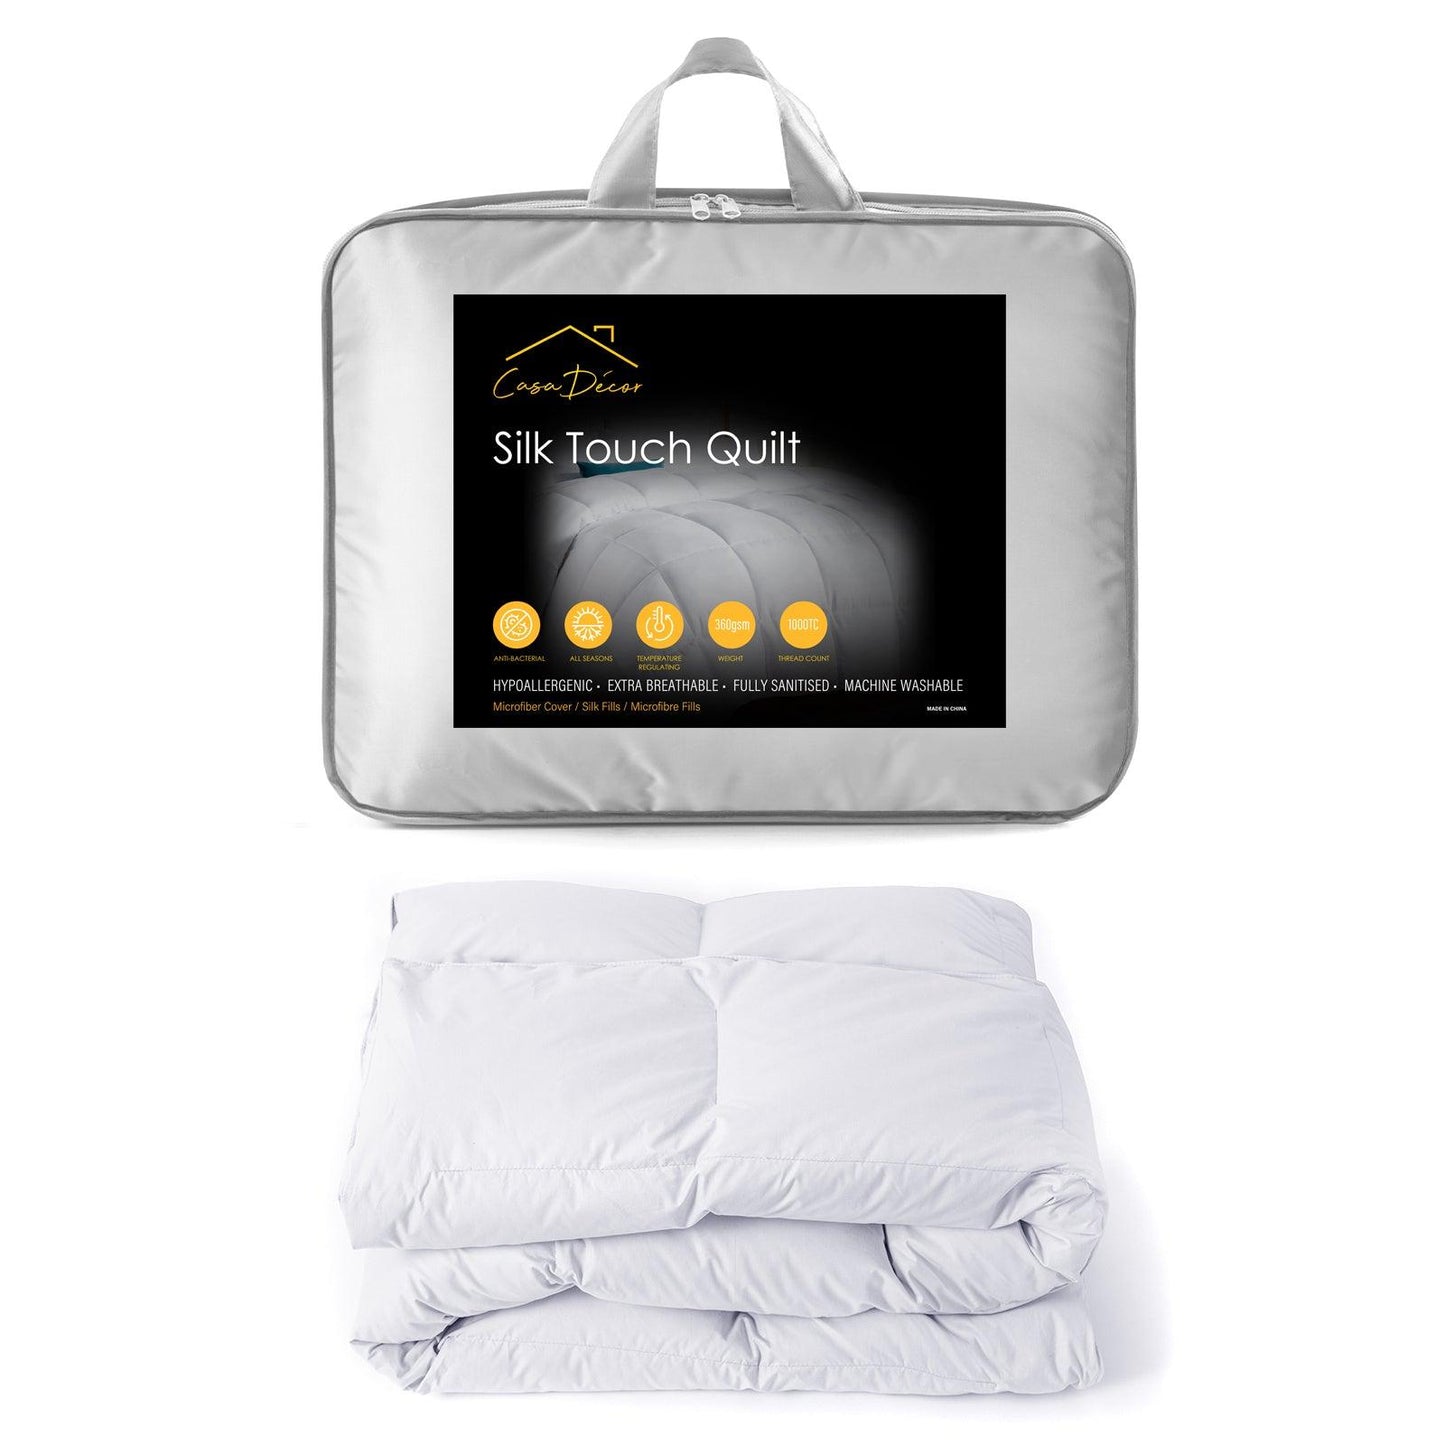 Casa Decor Silk Touch Quilt 360GSM All Seasons Antibacterial Hypoallergenic - Single - White